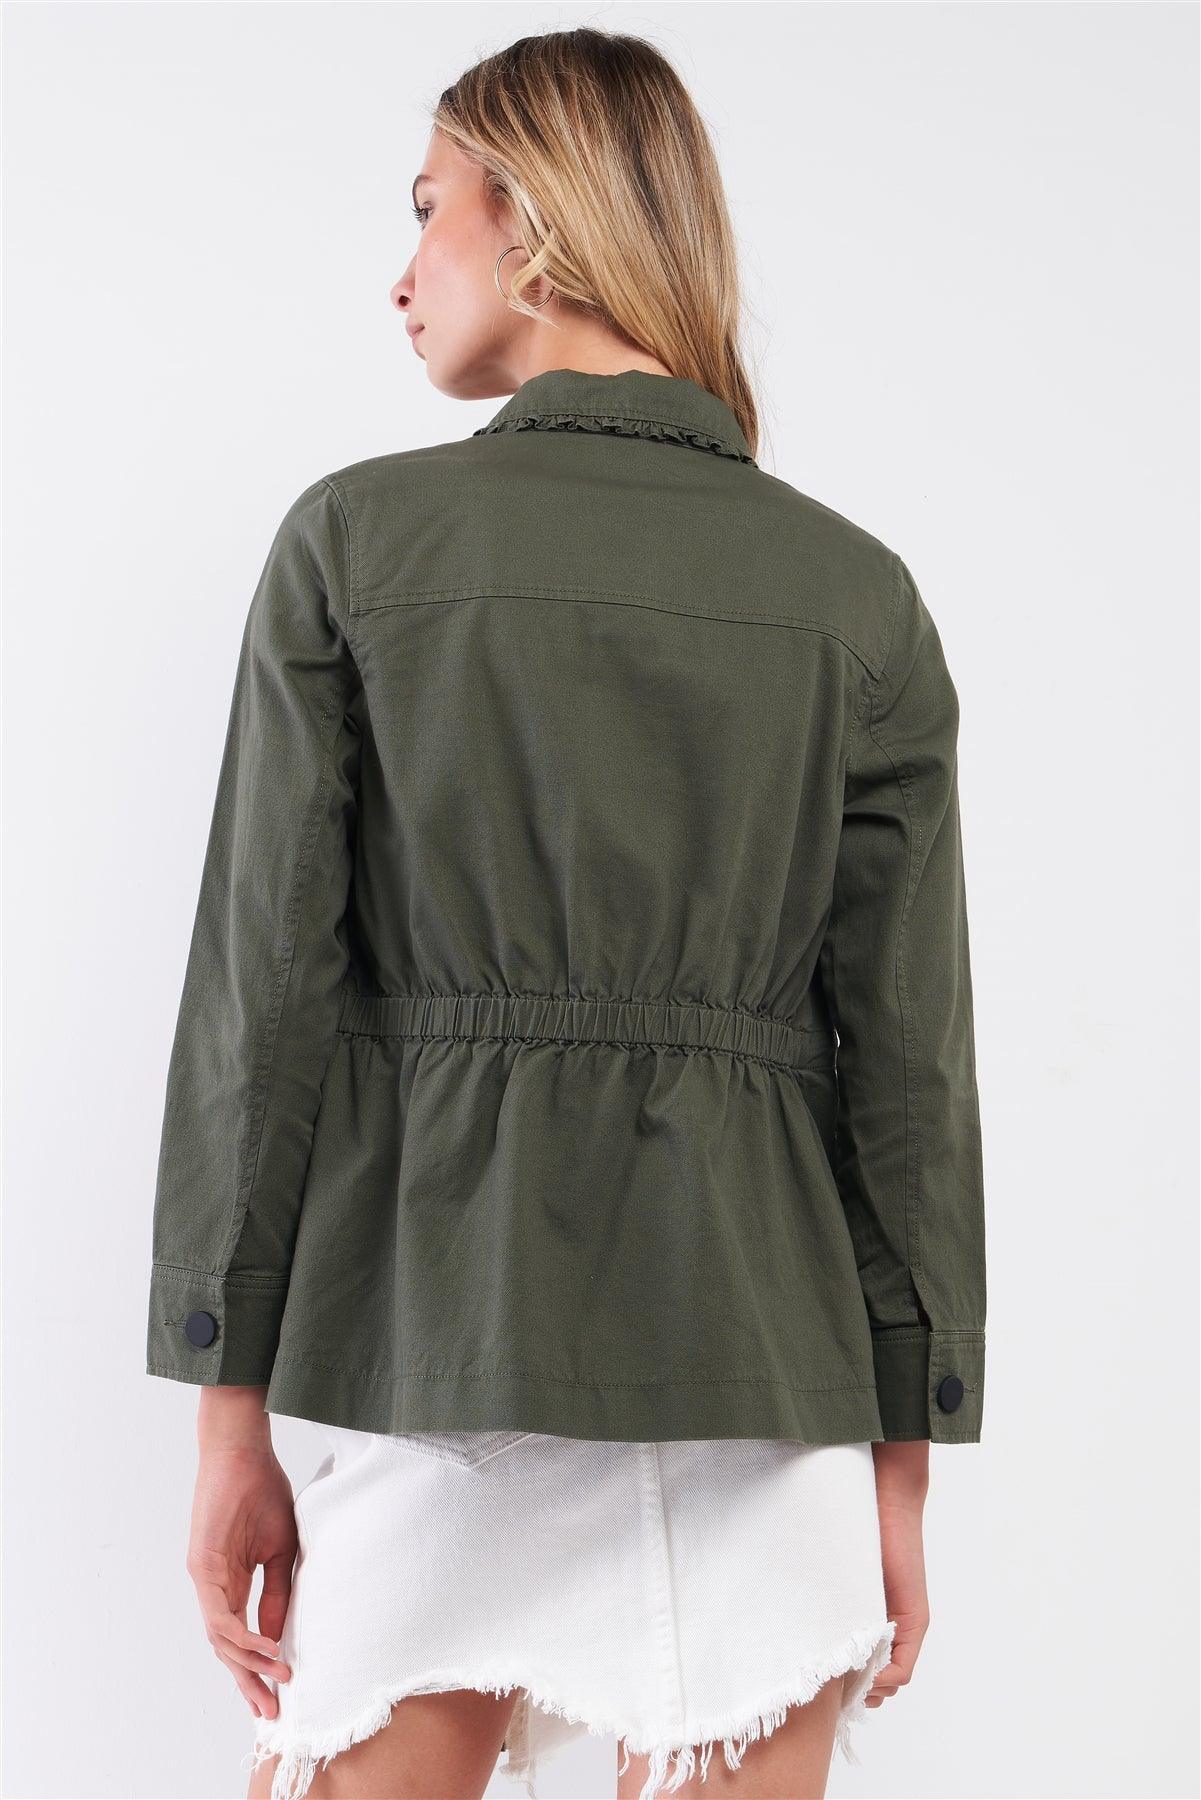 Olive Frill Trim Babydoll Collar Button-Down Front Adjustable Fitness Summer Jacket /1-2-2